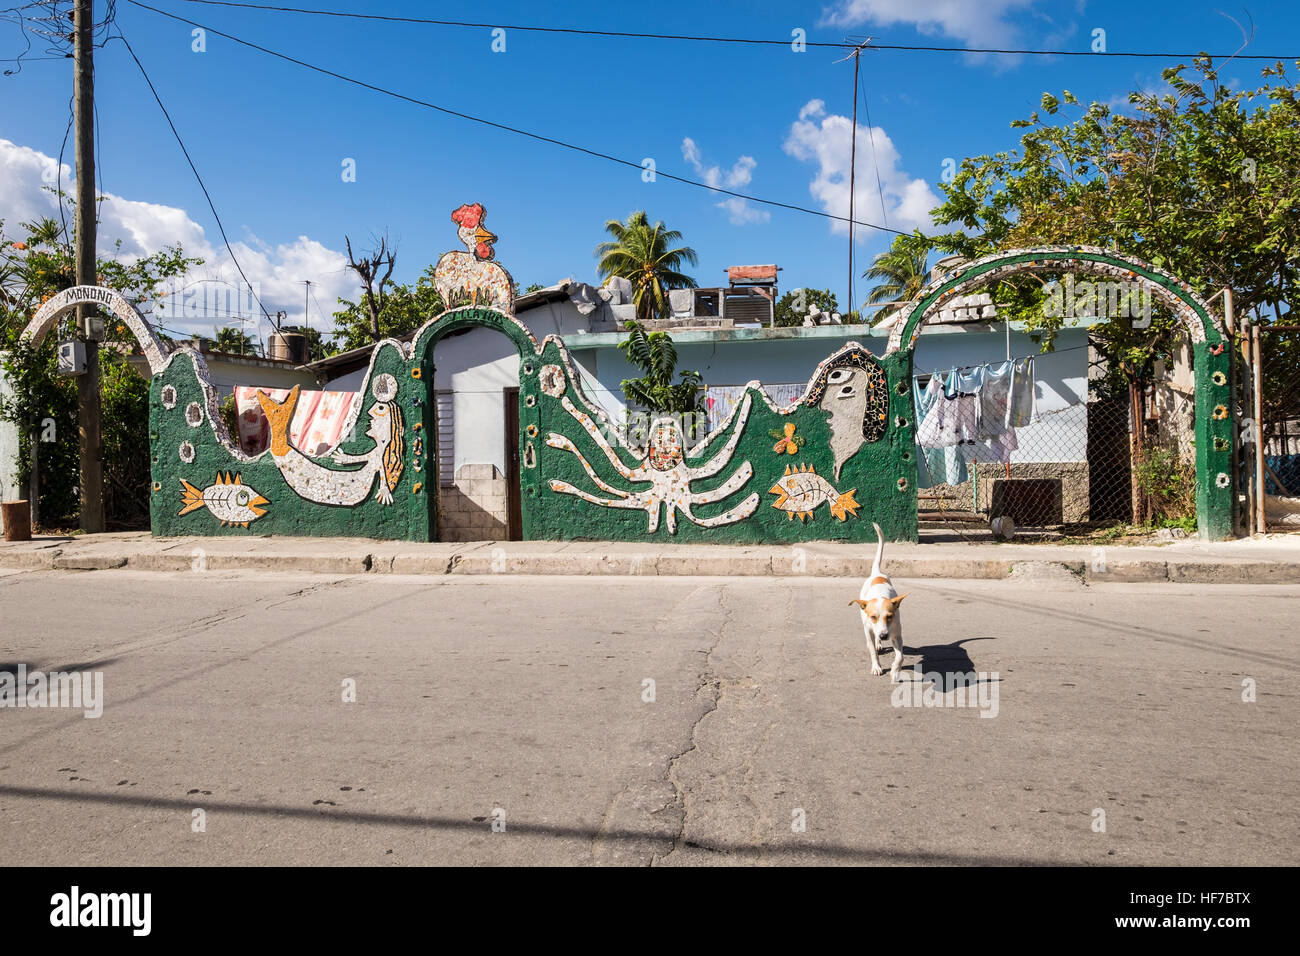 Artistic conversion of a community area by the artist Jose Fuster, using bright coloured tiles and sculptural shapes, Jaimanitas, La Havana, Cuba. Stock Photo